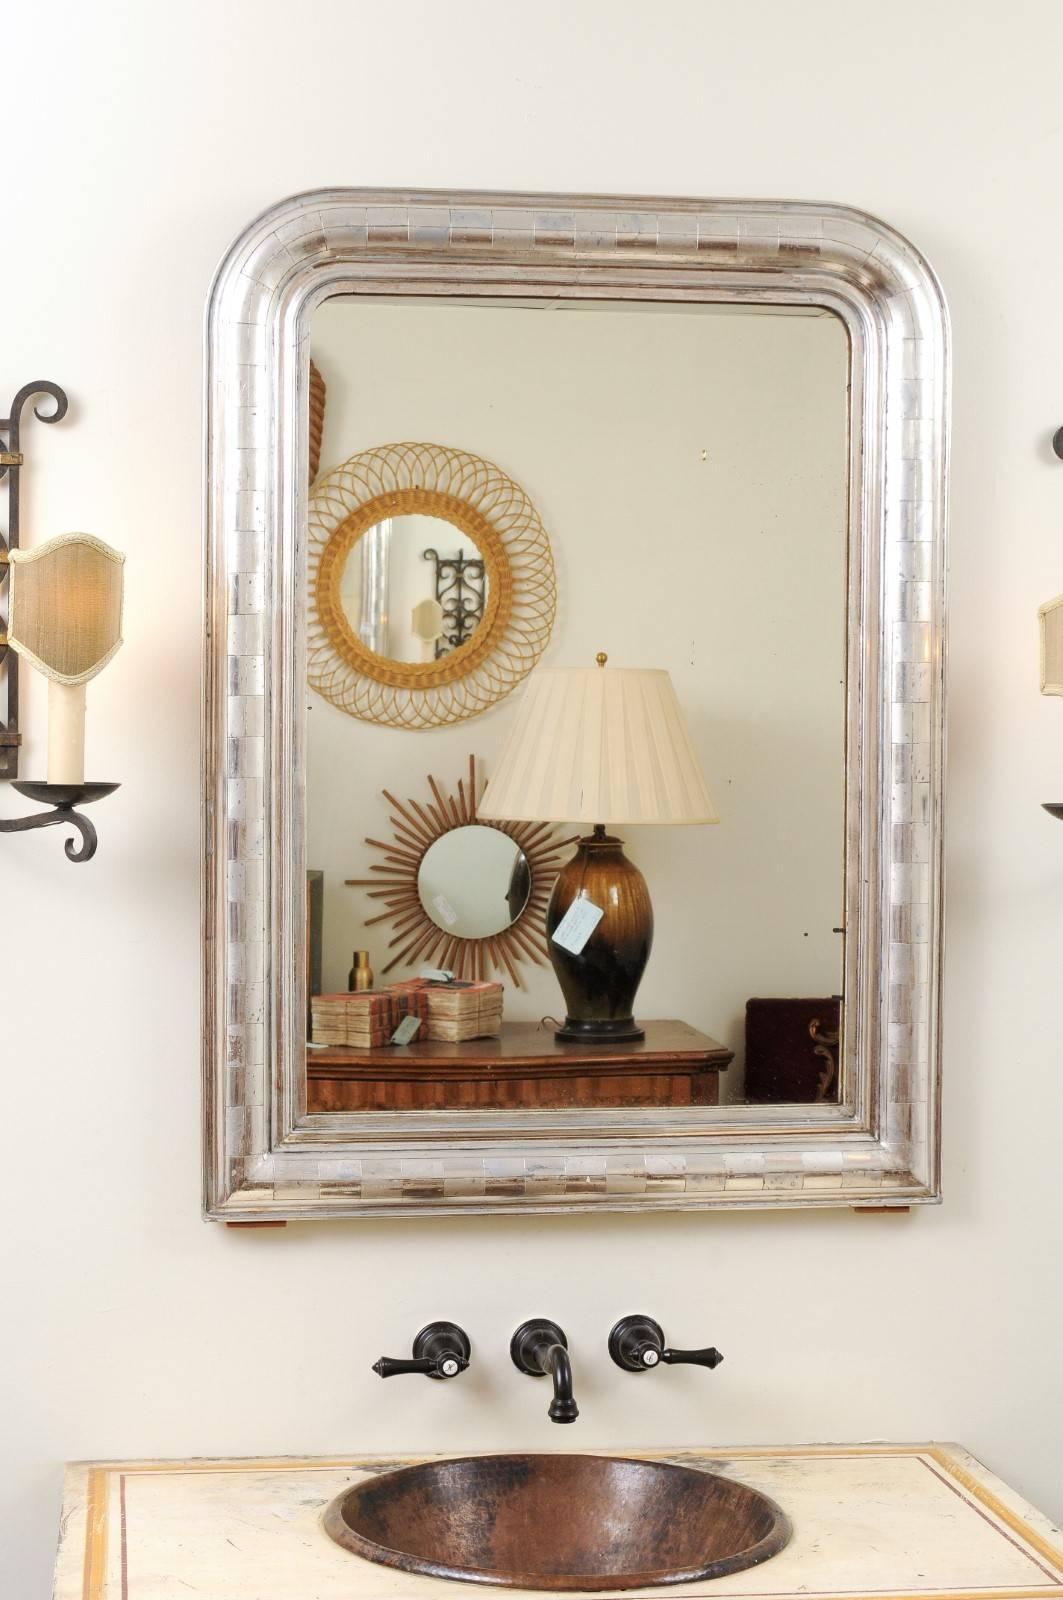 A French silver gilt Louis-Philippe mirror with alternating rectangular patterns from the 19th century. This French wall mirror features the typical silhouette of Louis-Philippe mirrors, with its rectangular frame topped with rounded corners in the